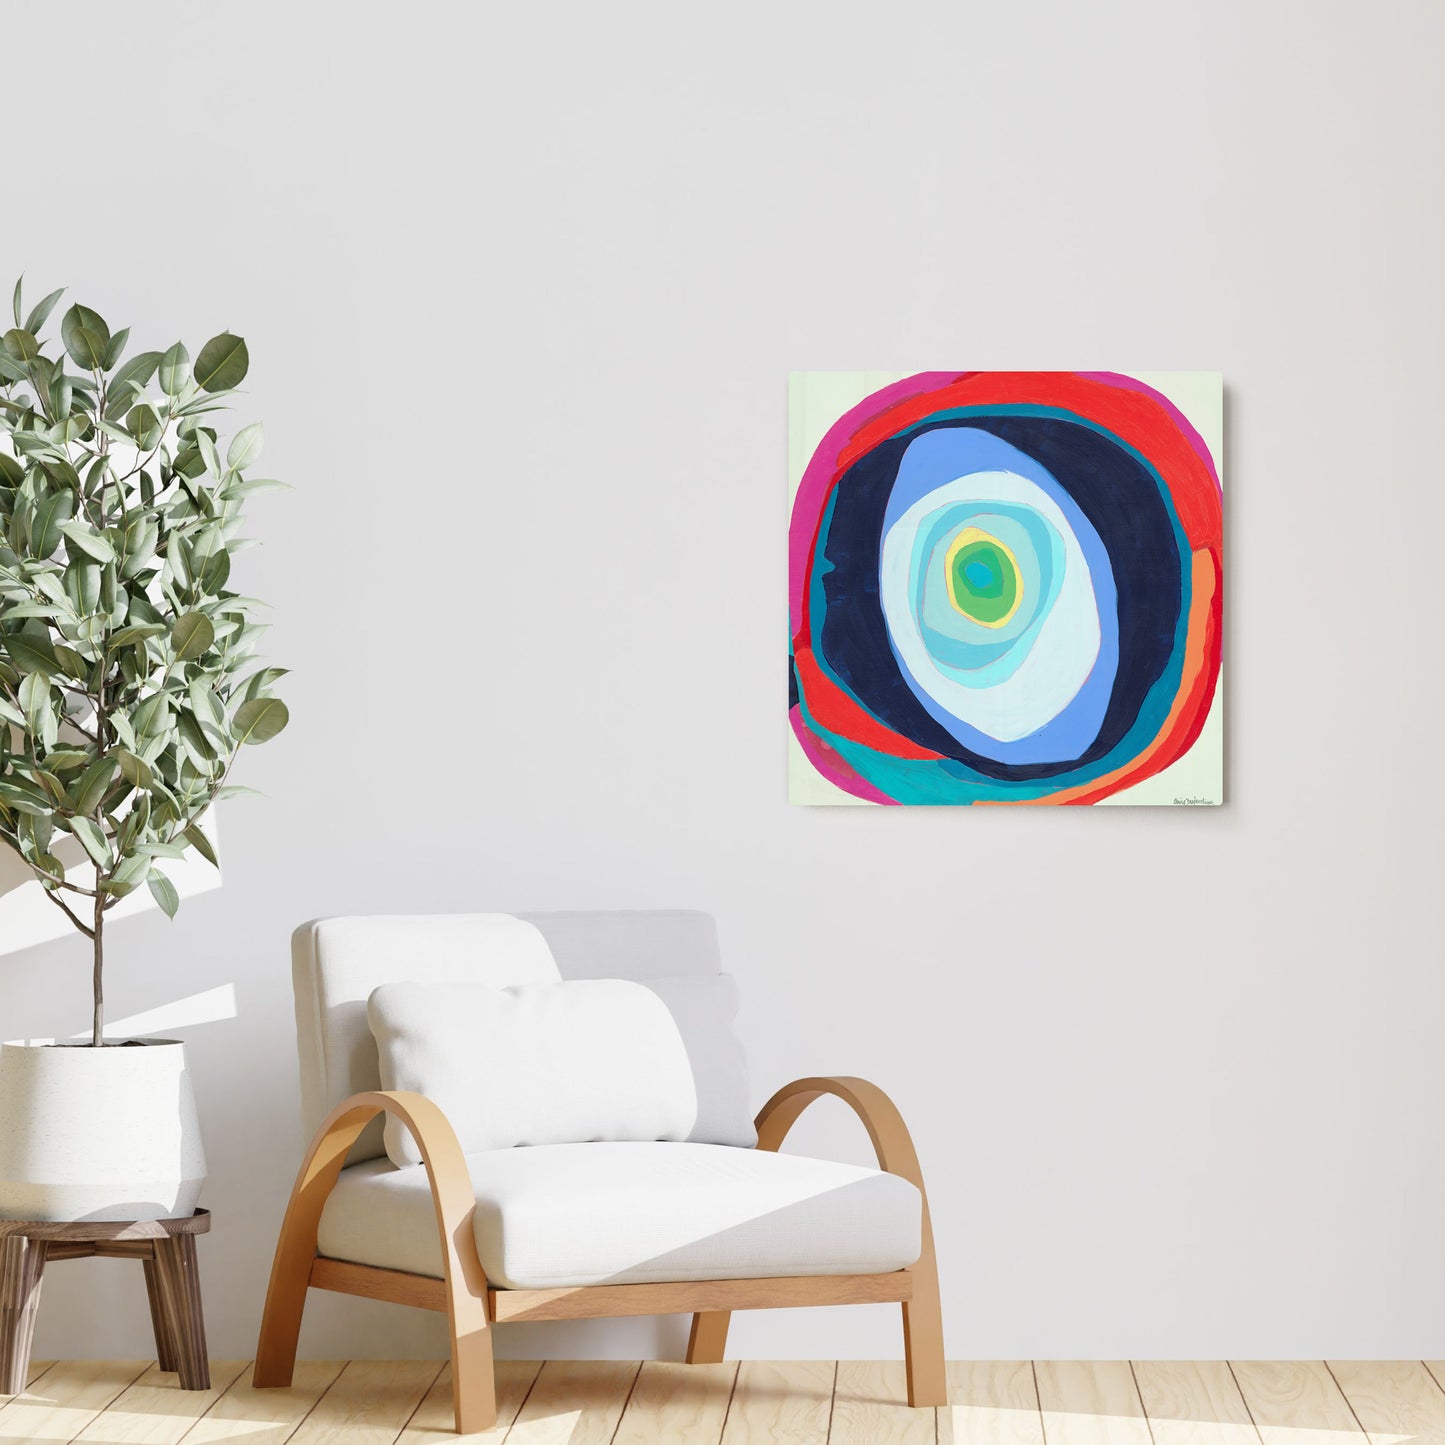 Claire Desjardins' My Intentions painting reproduced on HD metal print and displayed on wall